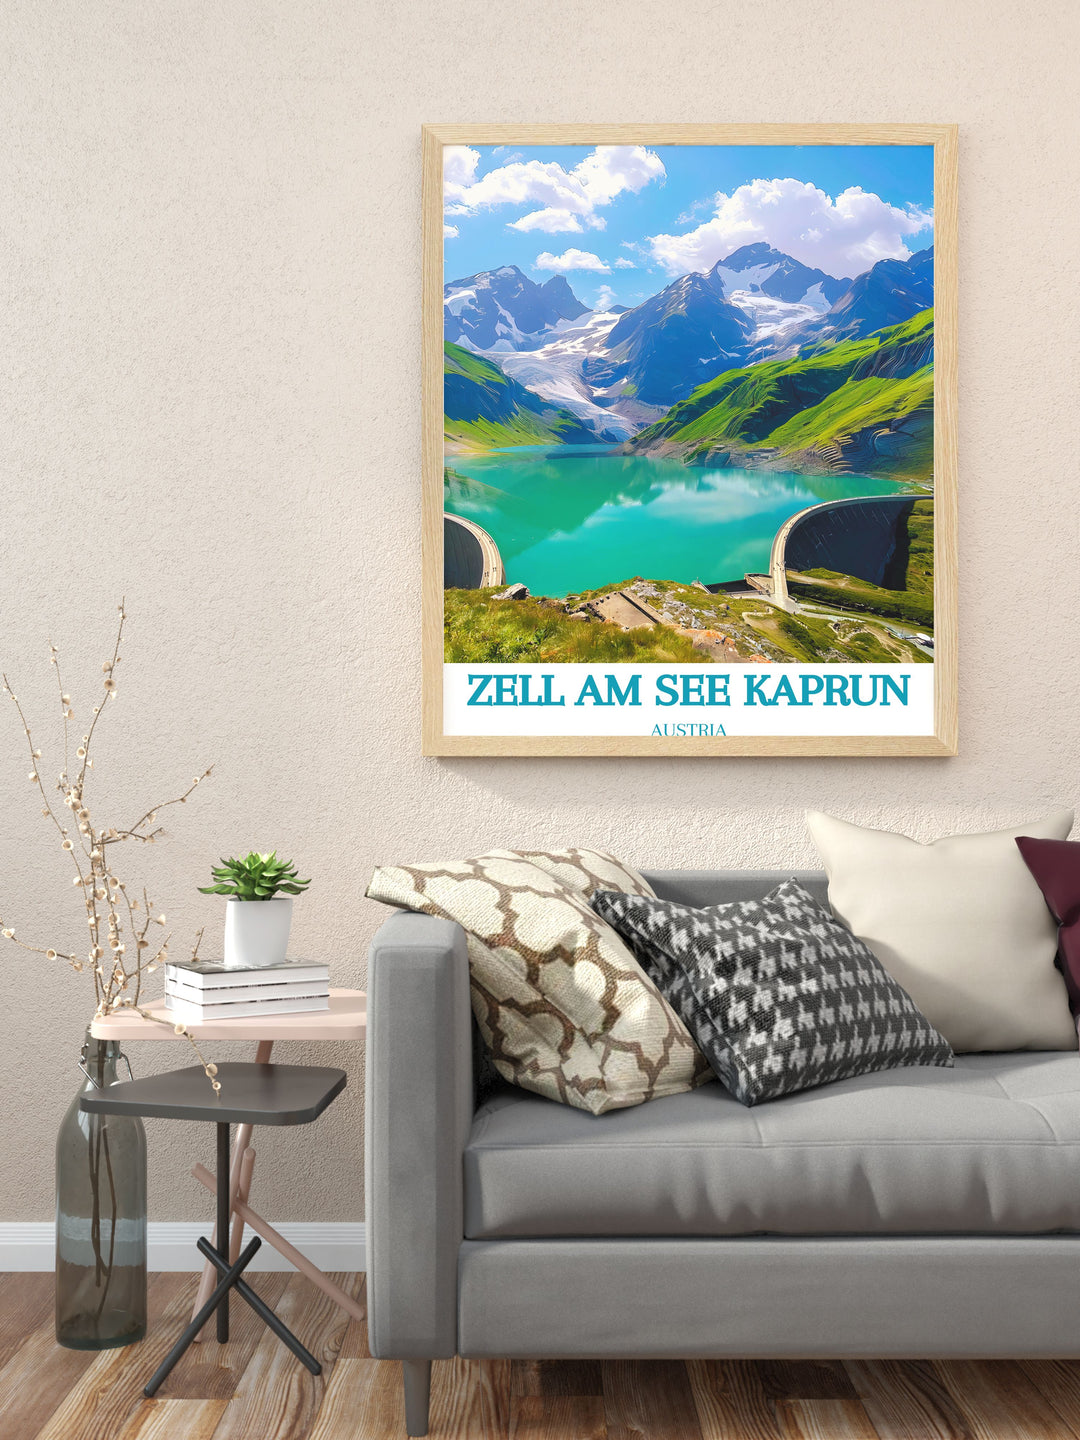 Beautiful canvas art of Zell am See, Austria. This artwork captures the picturesque landscapes, including the snow covered mountains, pristine lake, and vibrant village, bringing the enchanting beauty of the Austrian Alps into your home decor.